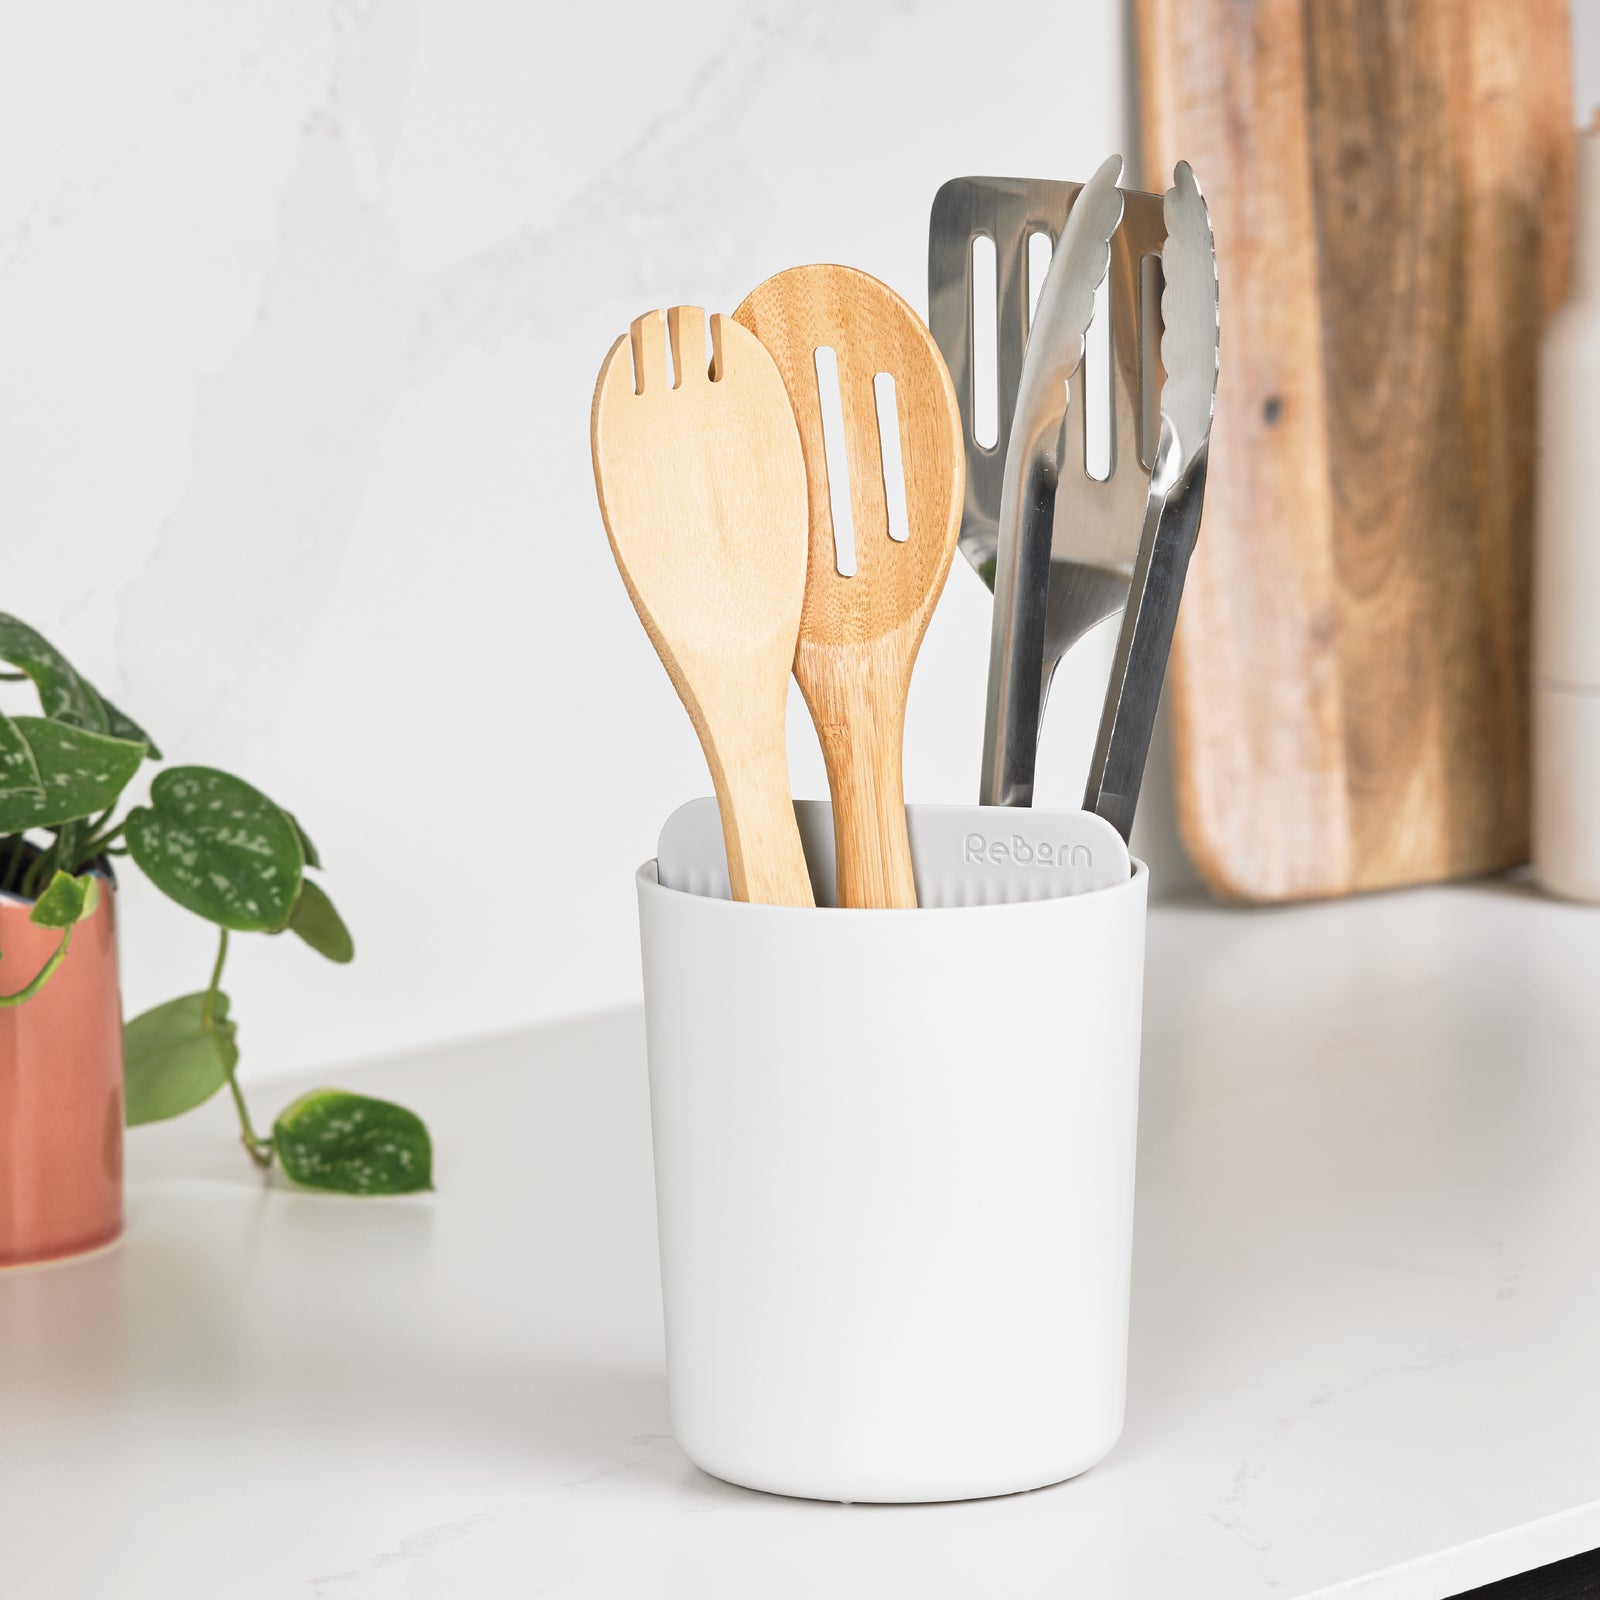 ReBorn Recycled Utensil Holder - Stone Kitchen Organiser - Two Sections, Organised and Tidy - Made in UK